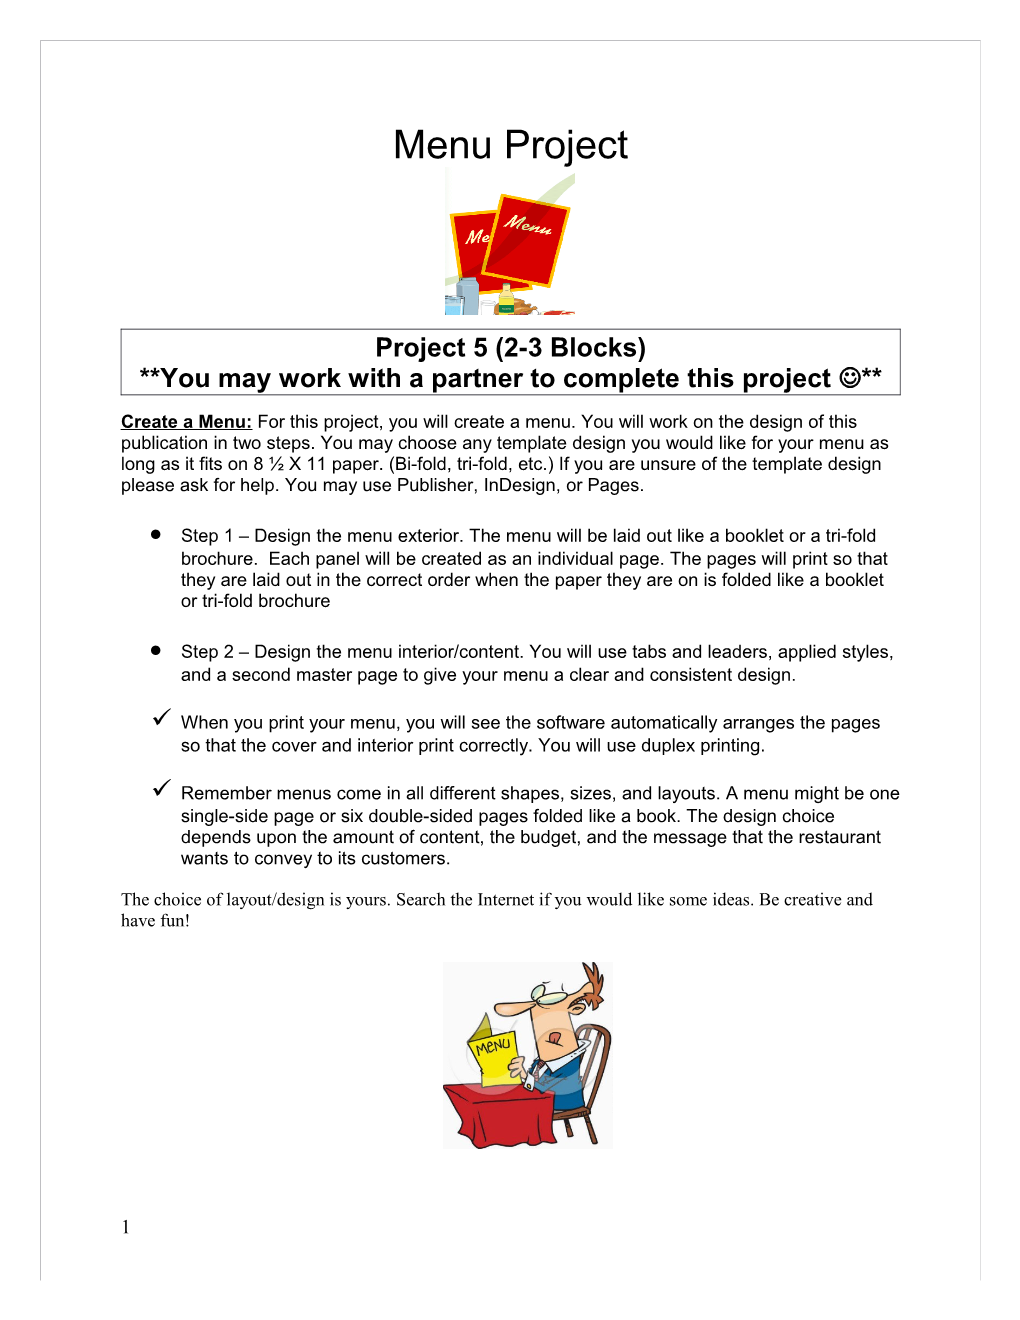 You May Work with a Partner to Complete This Project